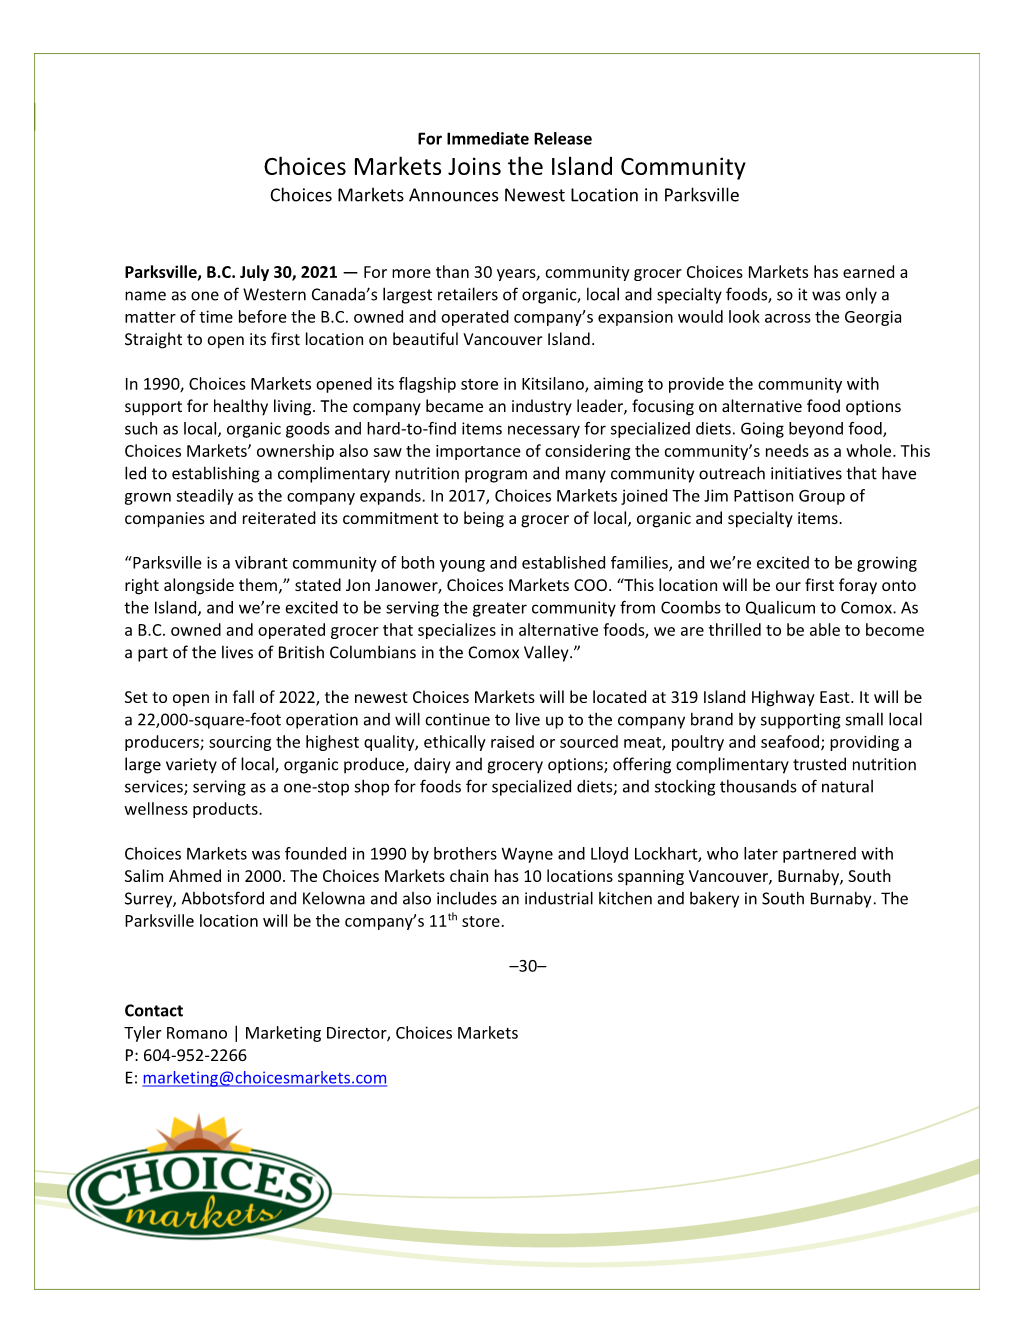 Choices Markets Joins the Island Community Choices Markets Announces Newest Location in Parksville